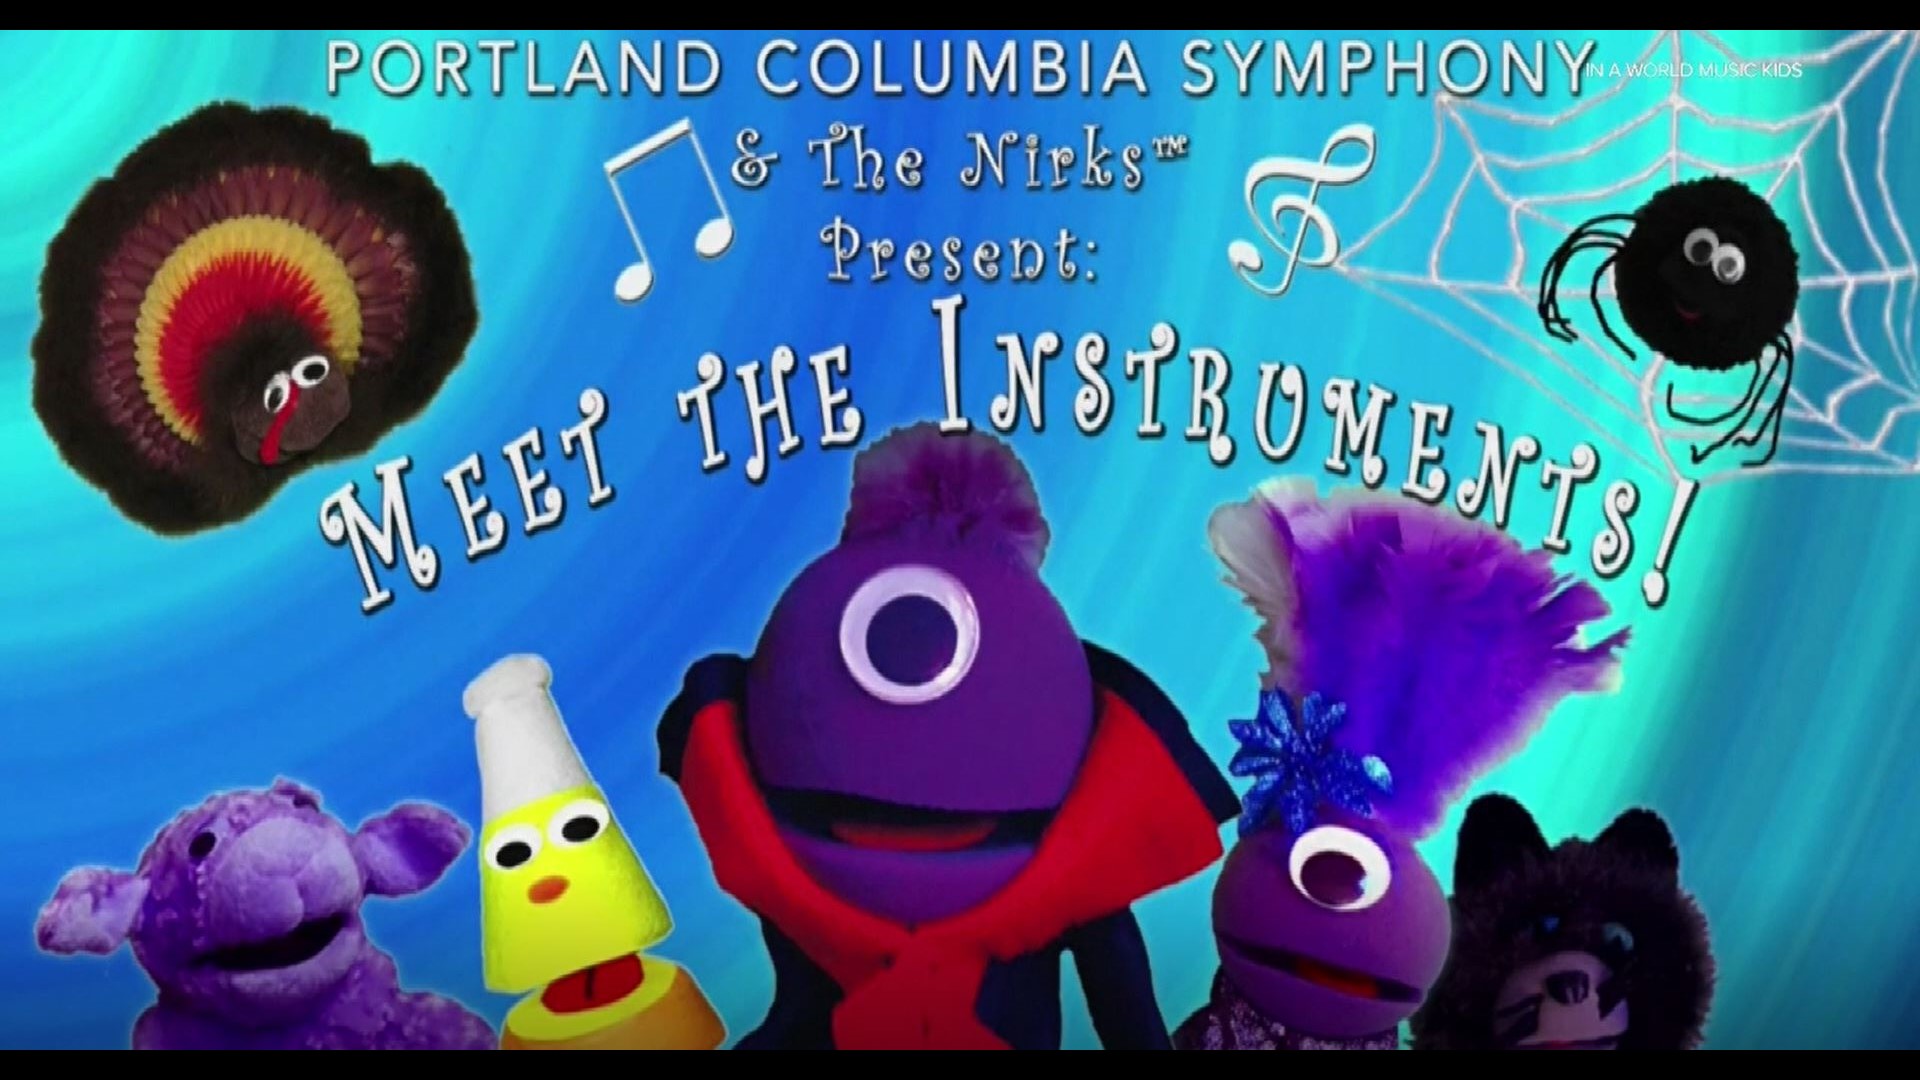 Making music is a huge mission for Portland Columbia Symphony. Next week they start an online symphony for kids.